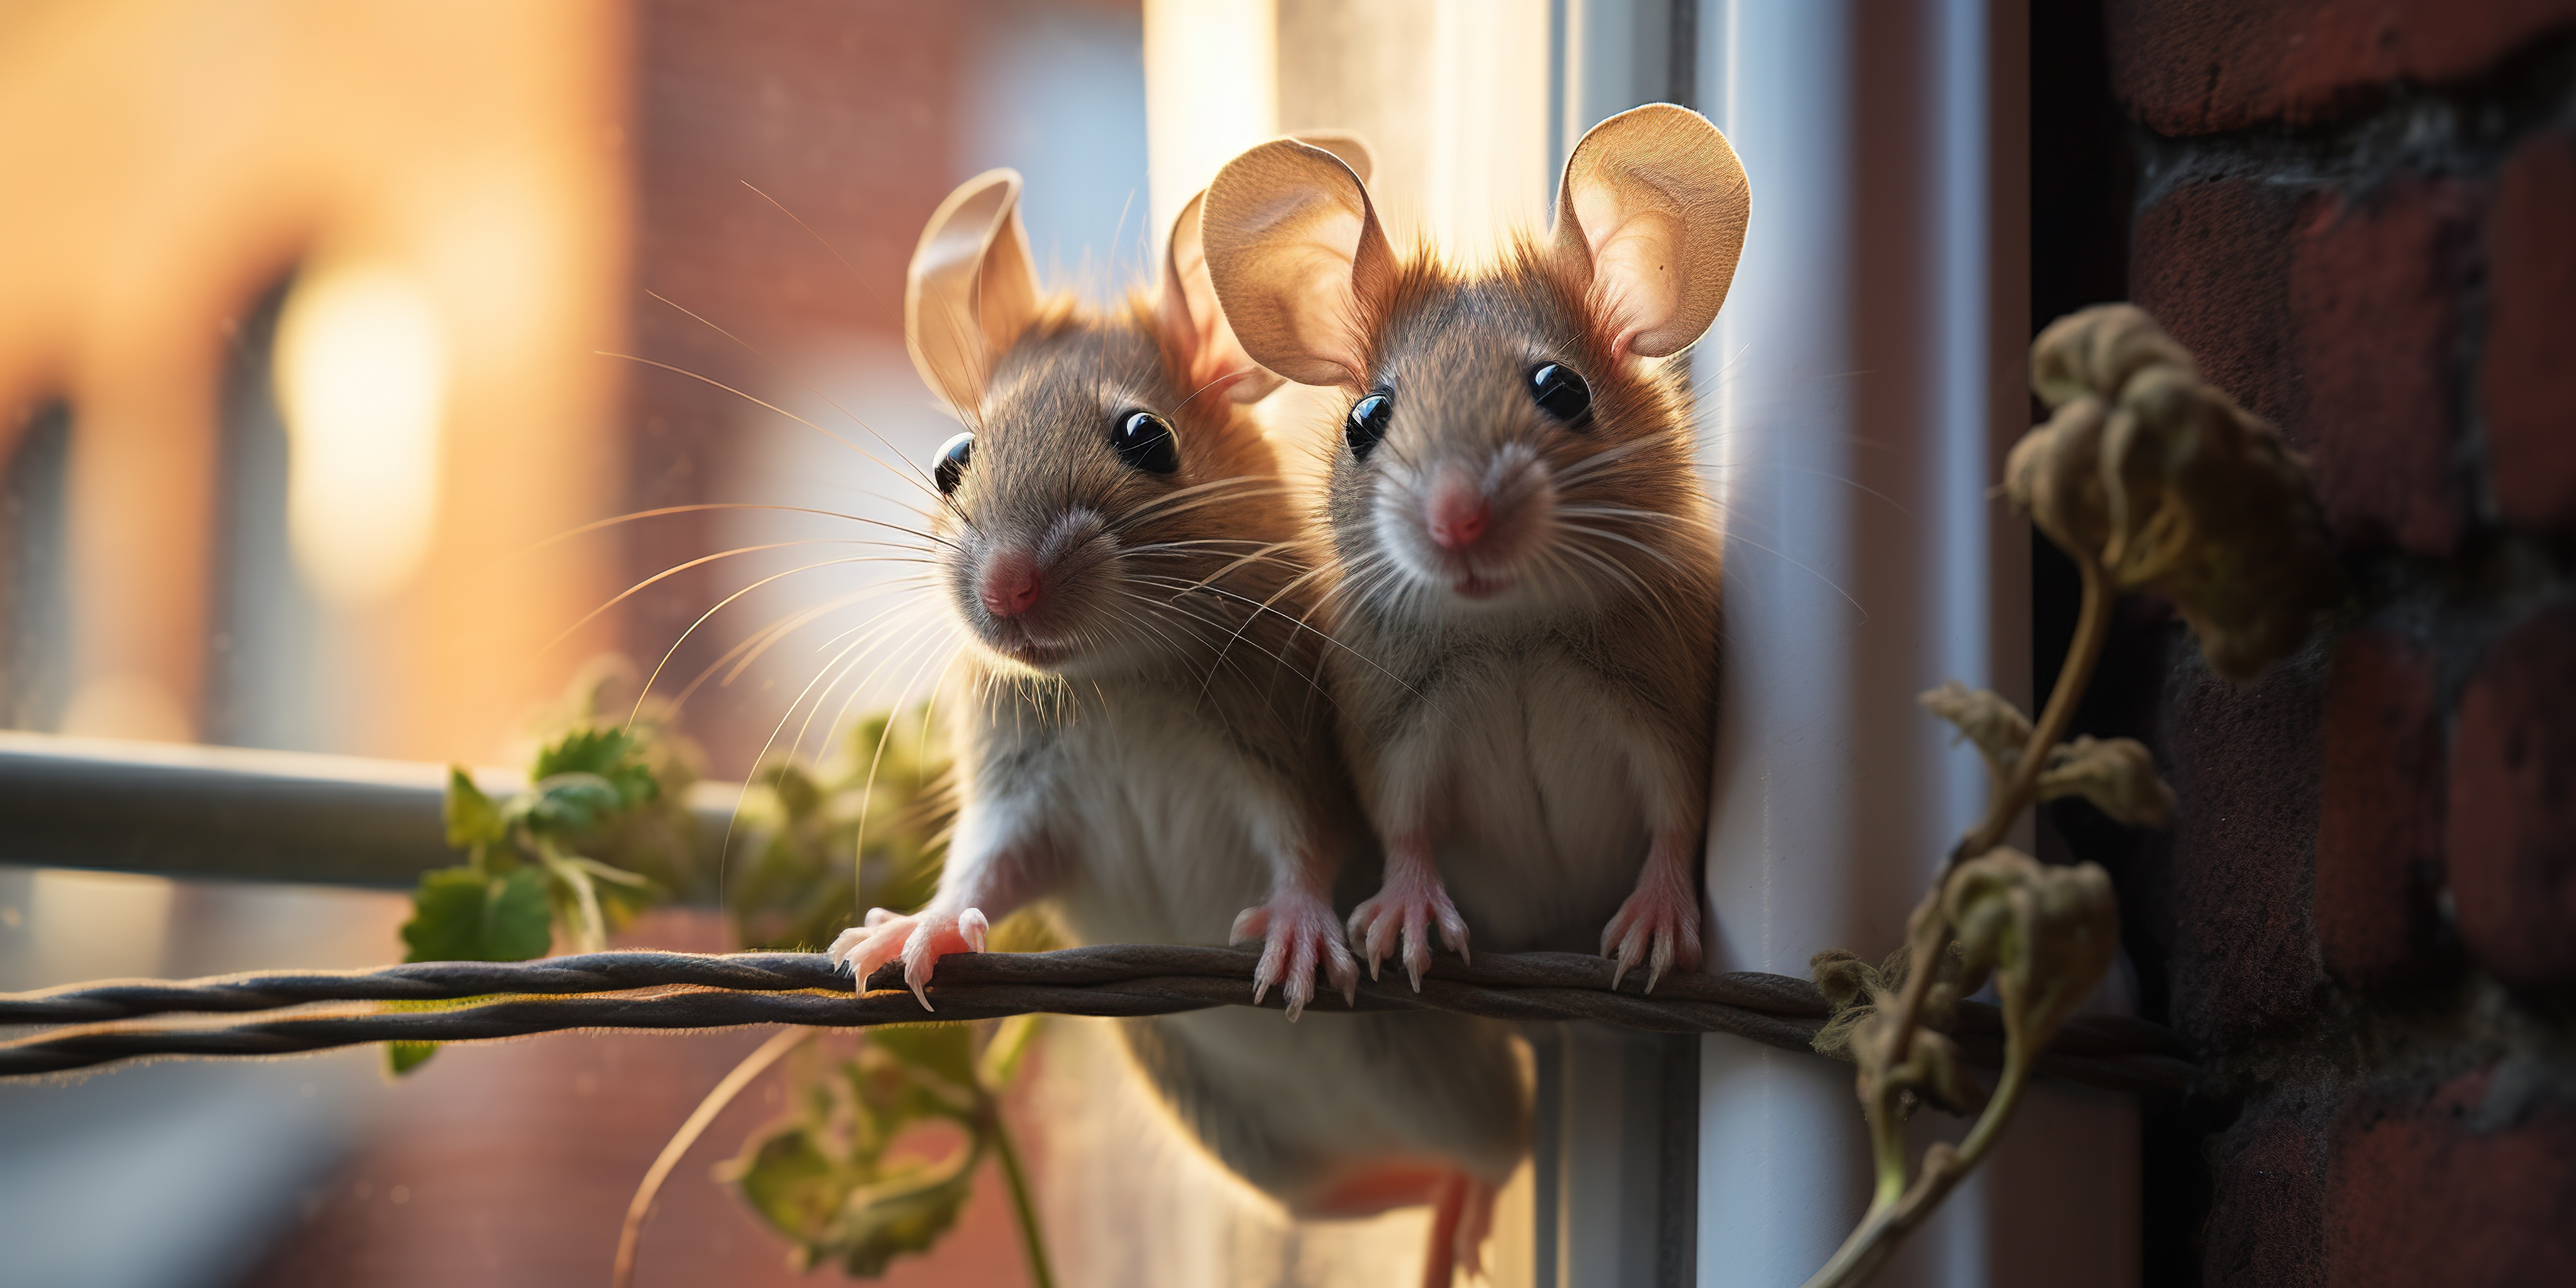 Image of two mice